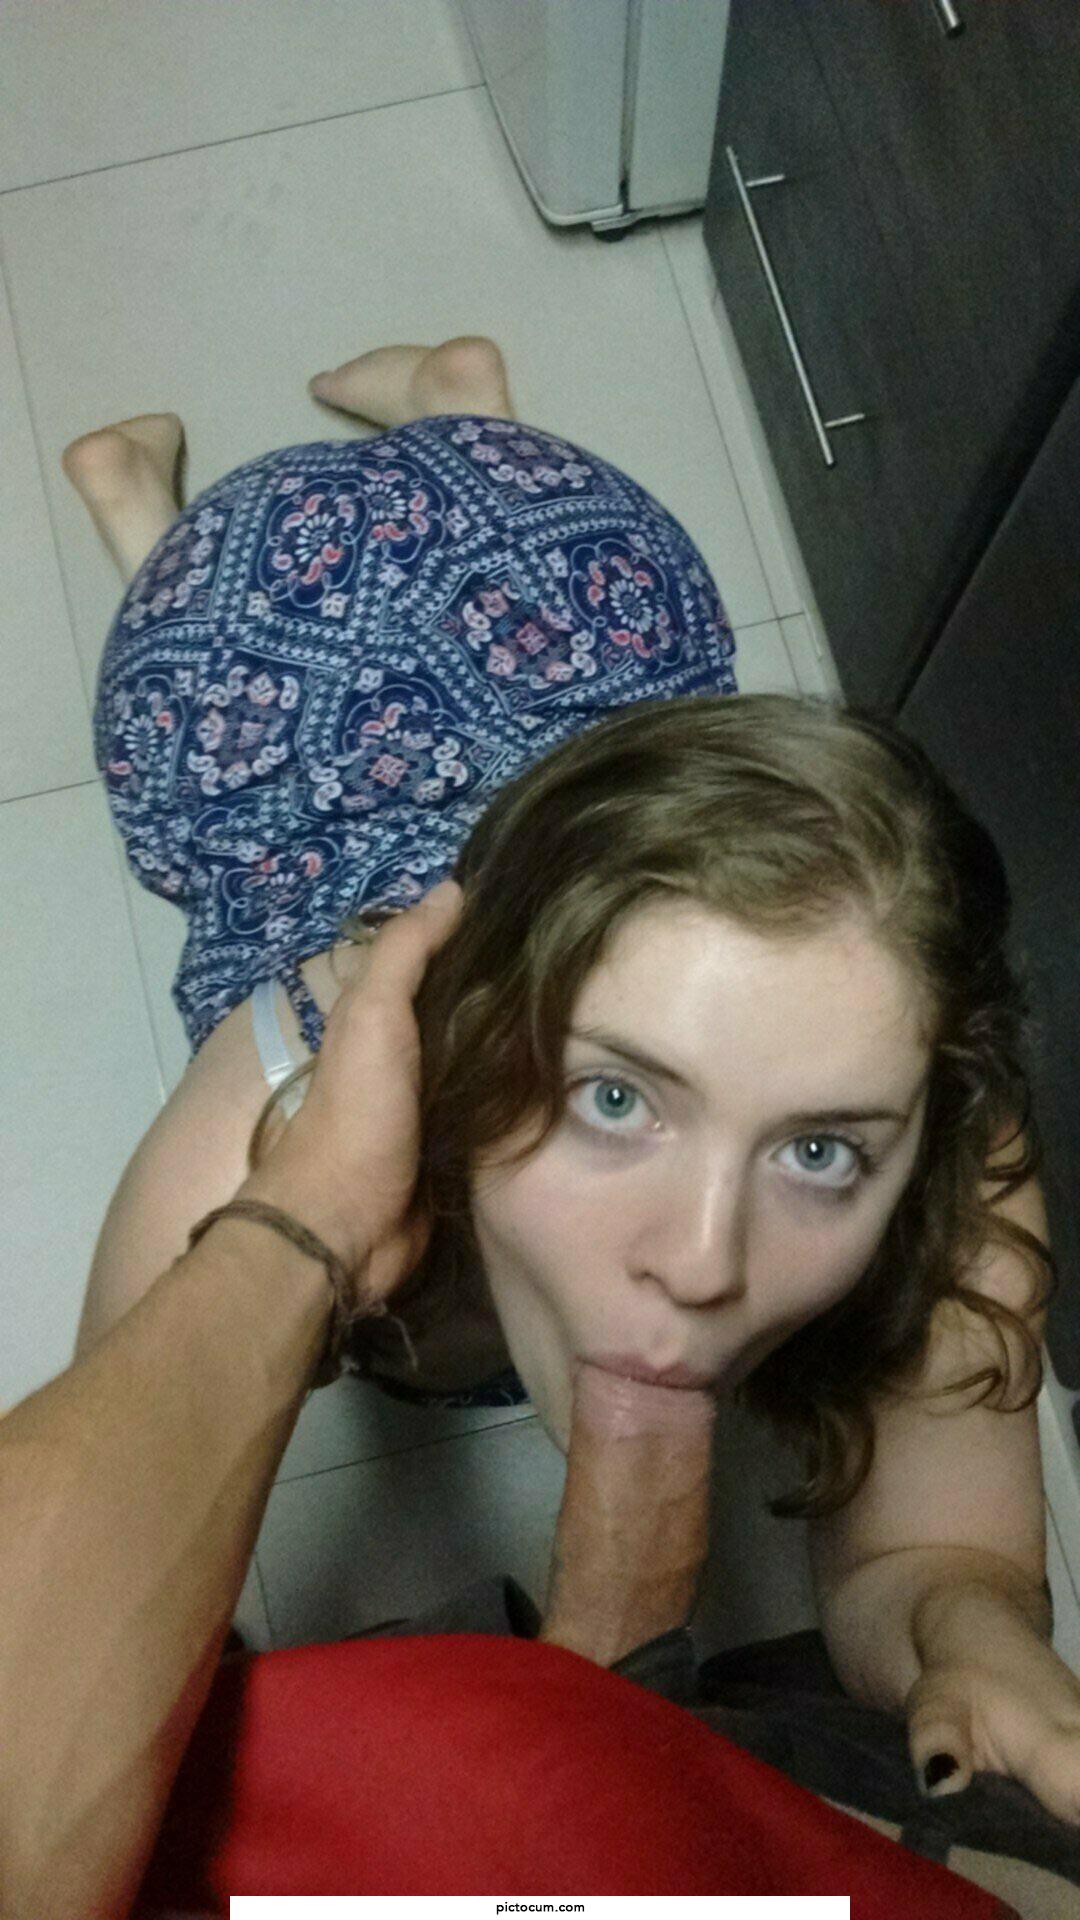 On her knees maintaining eye contact with a cock in her mouth like a good girl